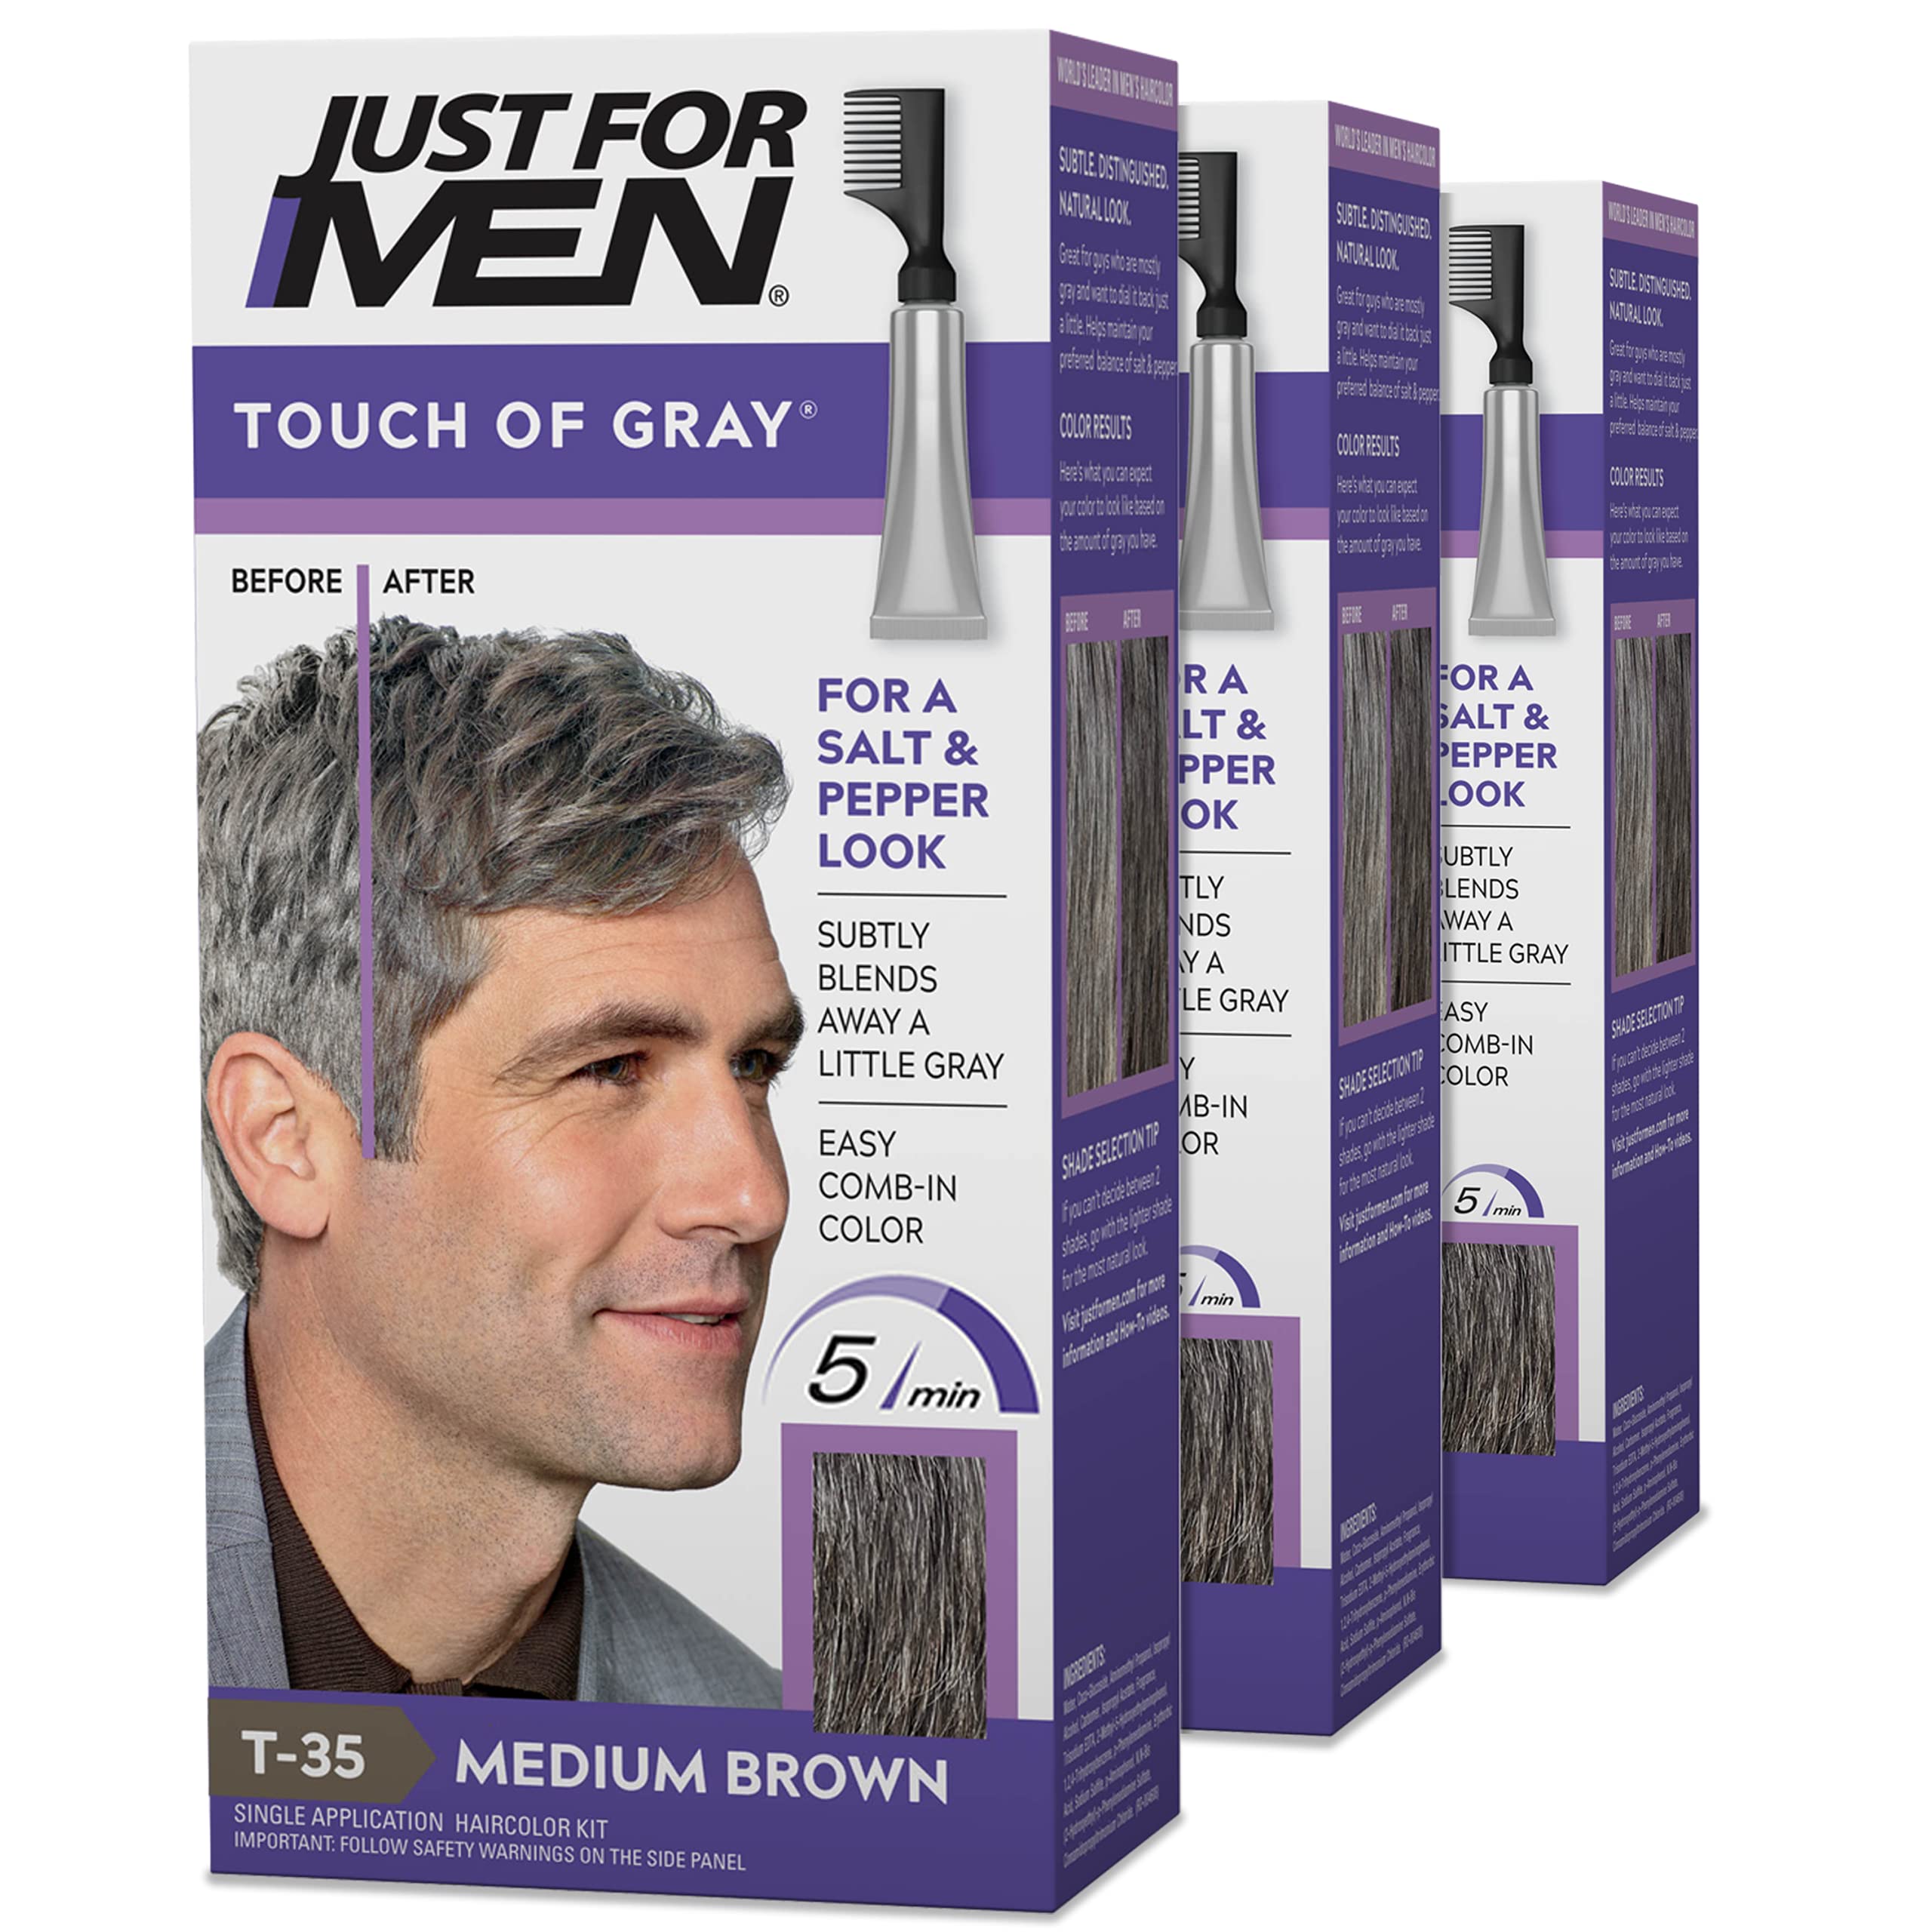 Just For Men Touch of Gray, Mens Hair Color Kit with Comb Applicator for Easy Application, Great for a Salt and Pepper Look - Medium Brown, T-35, Pack of 3